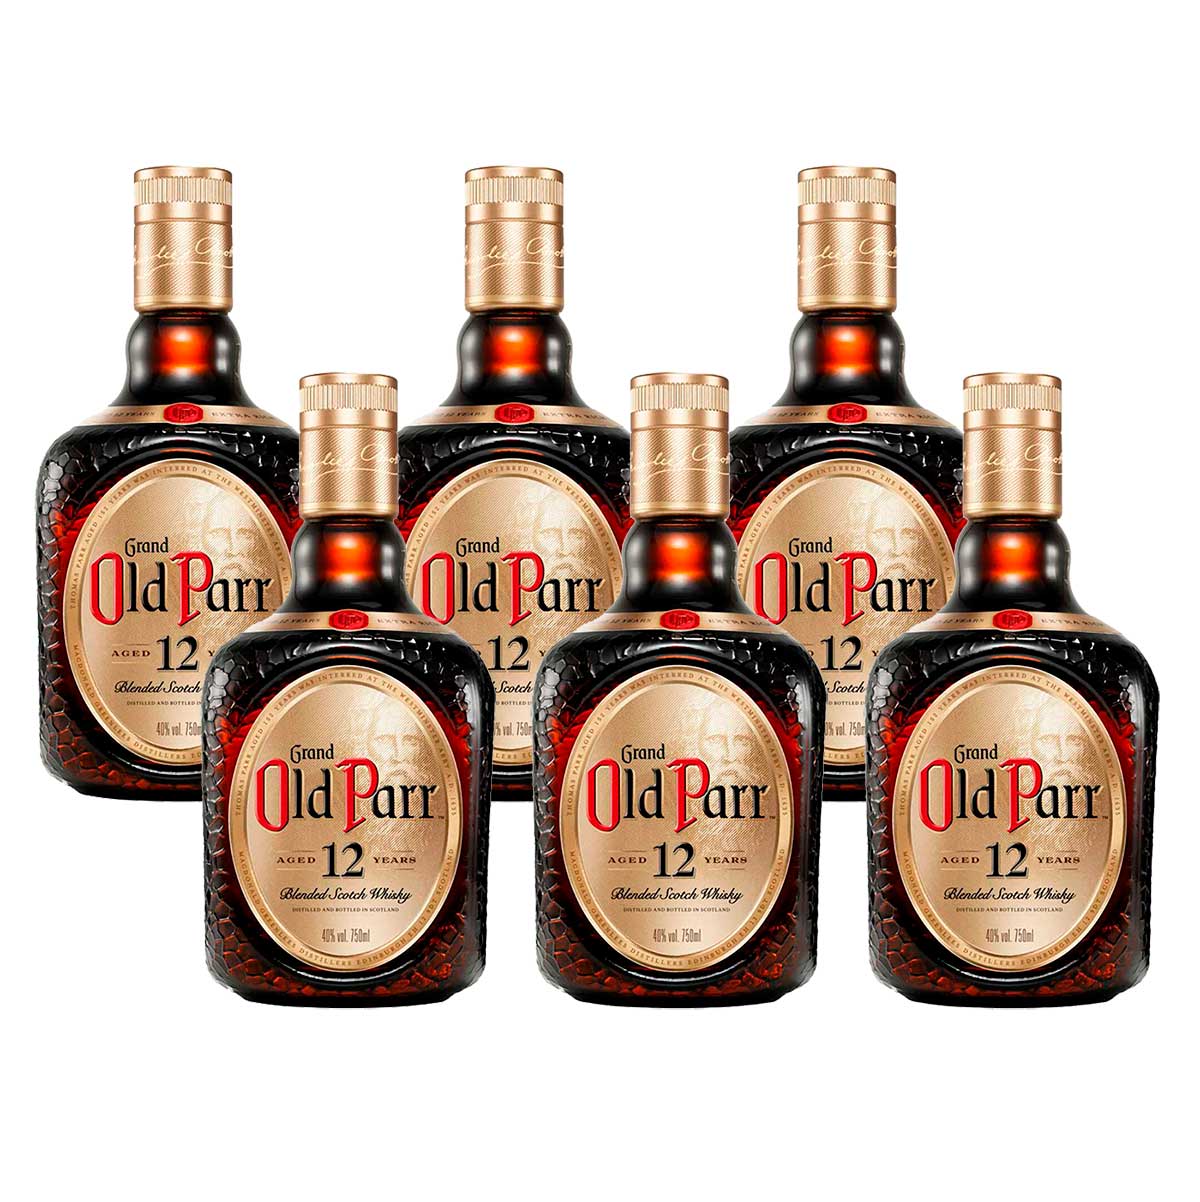 whisky-old-parr-750ml-6-unidades-1.jpg